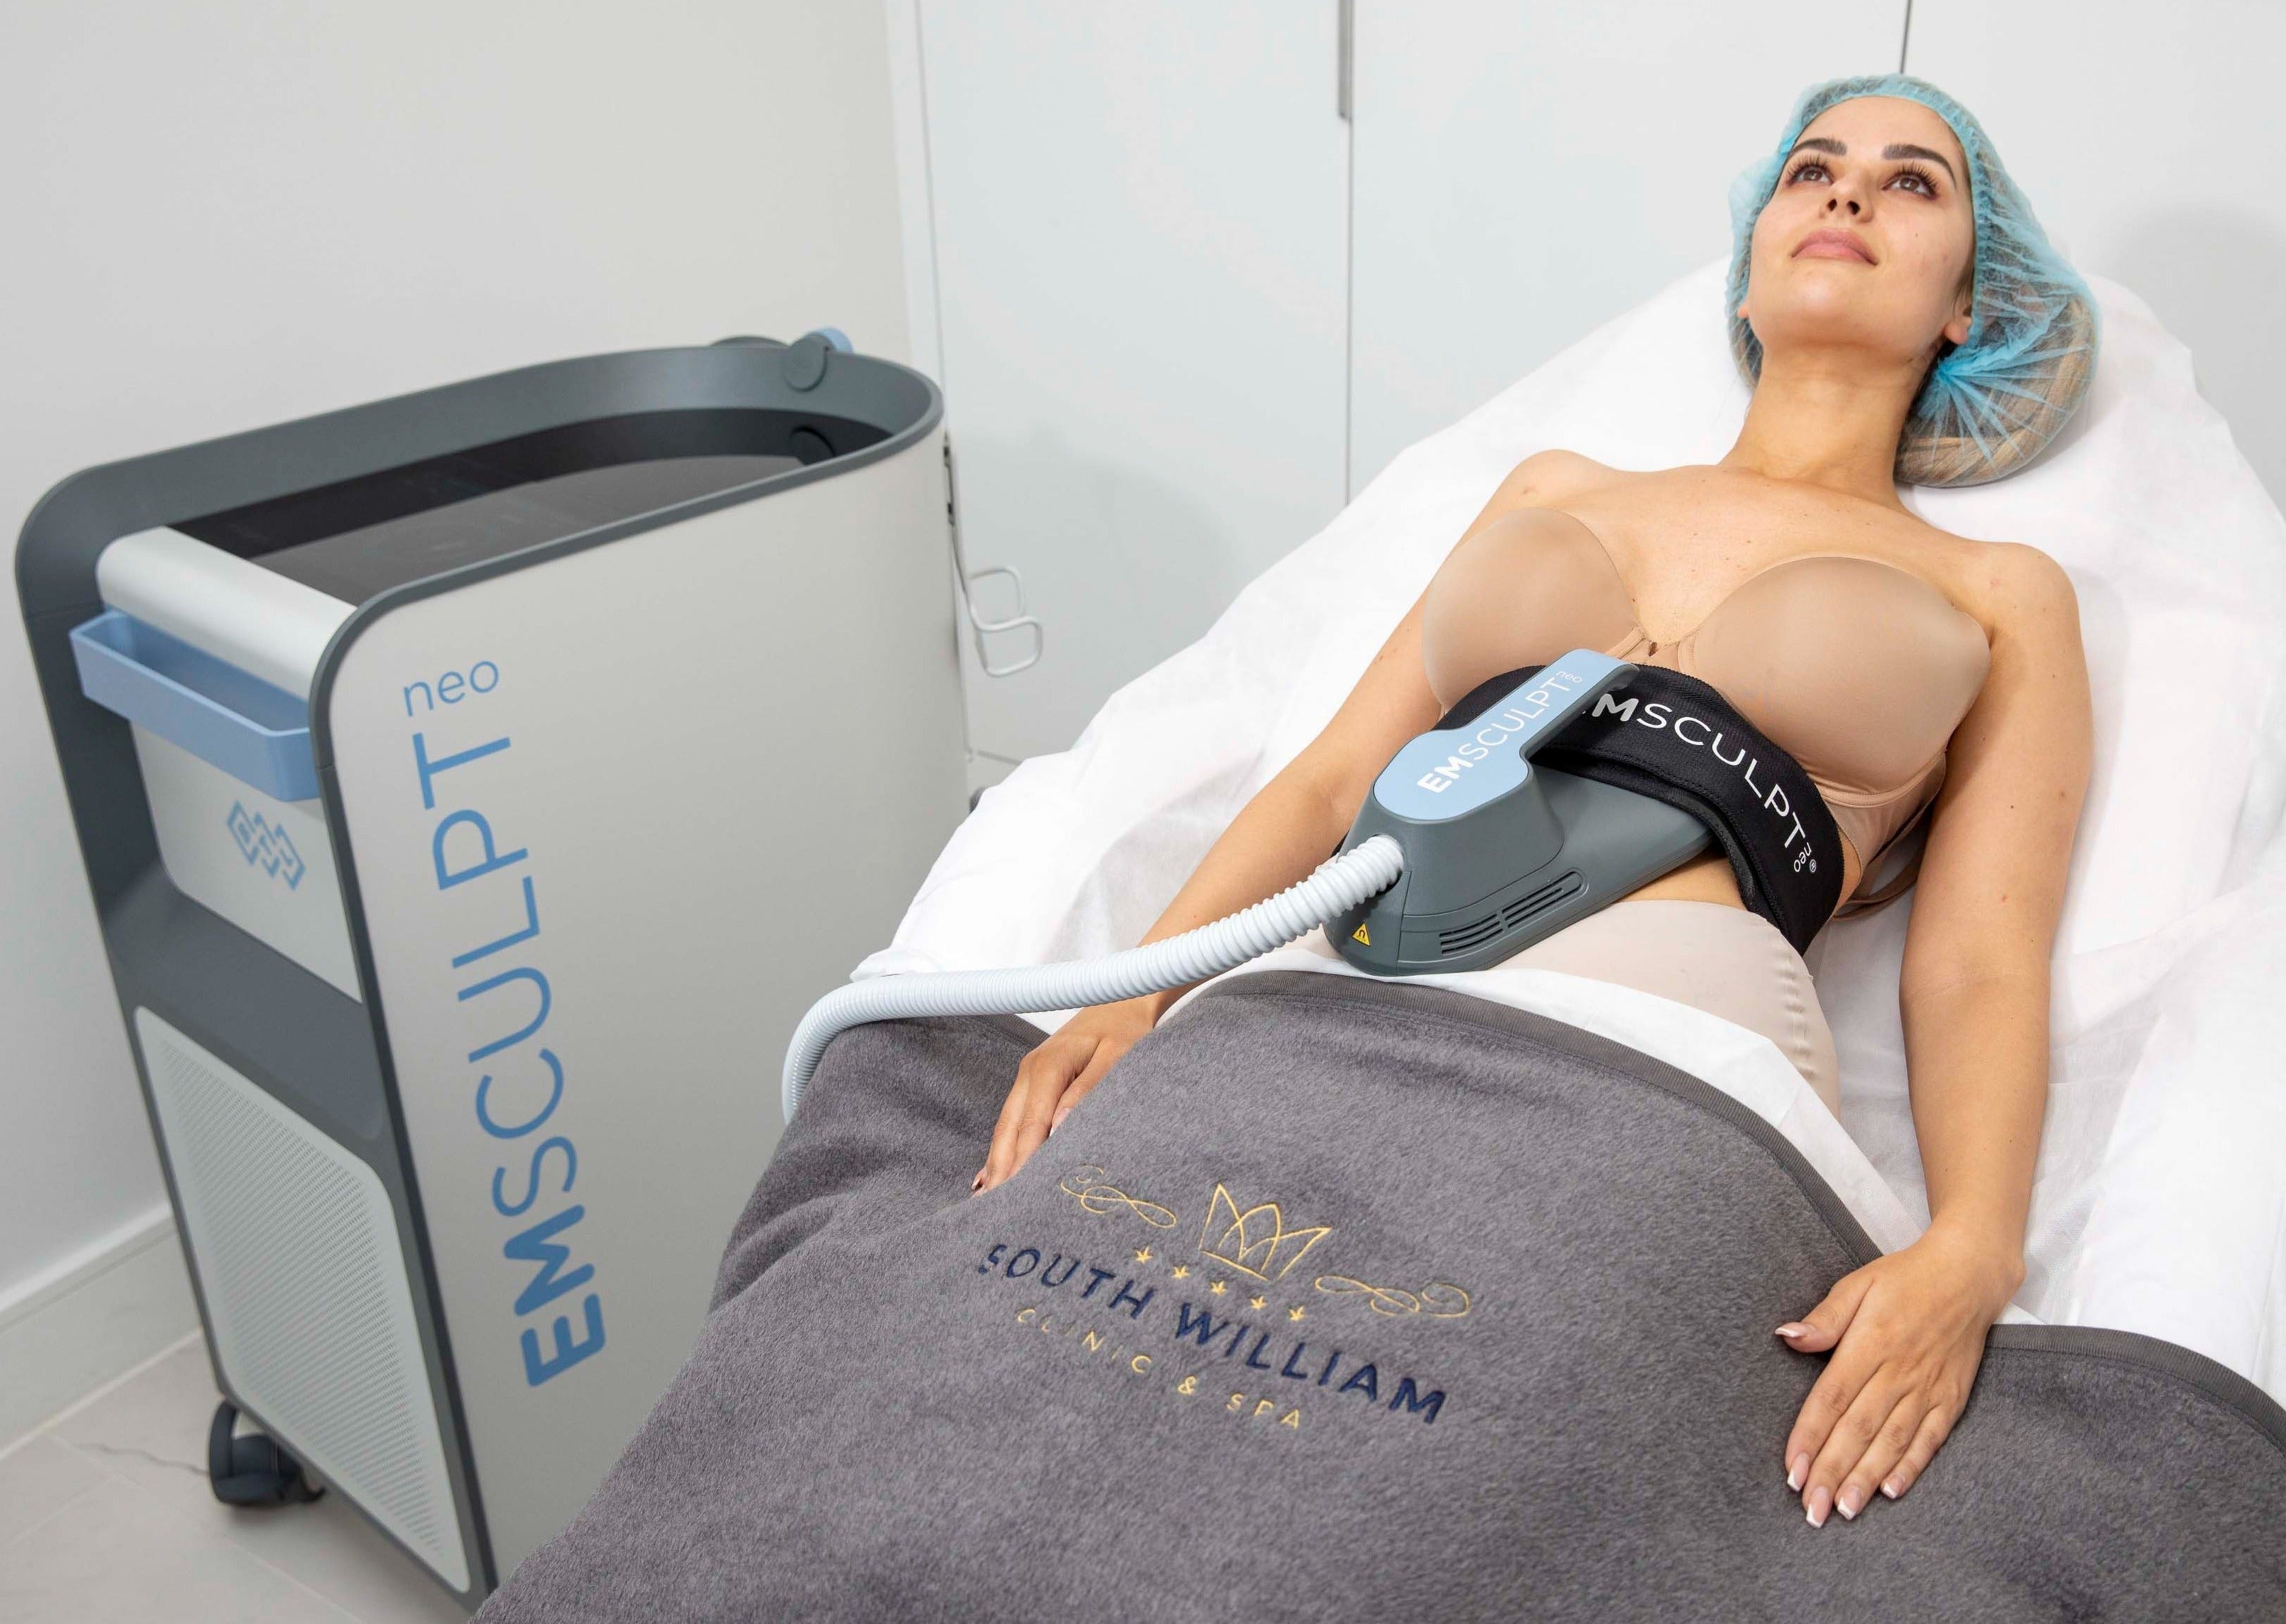 EmSculpt NEO Muscle Building & Fat Burning as low as €300 per session